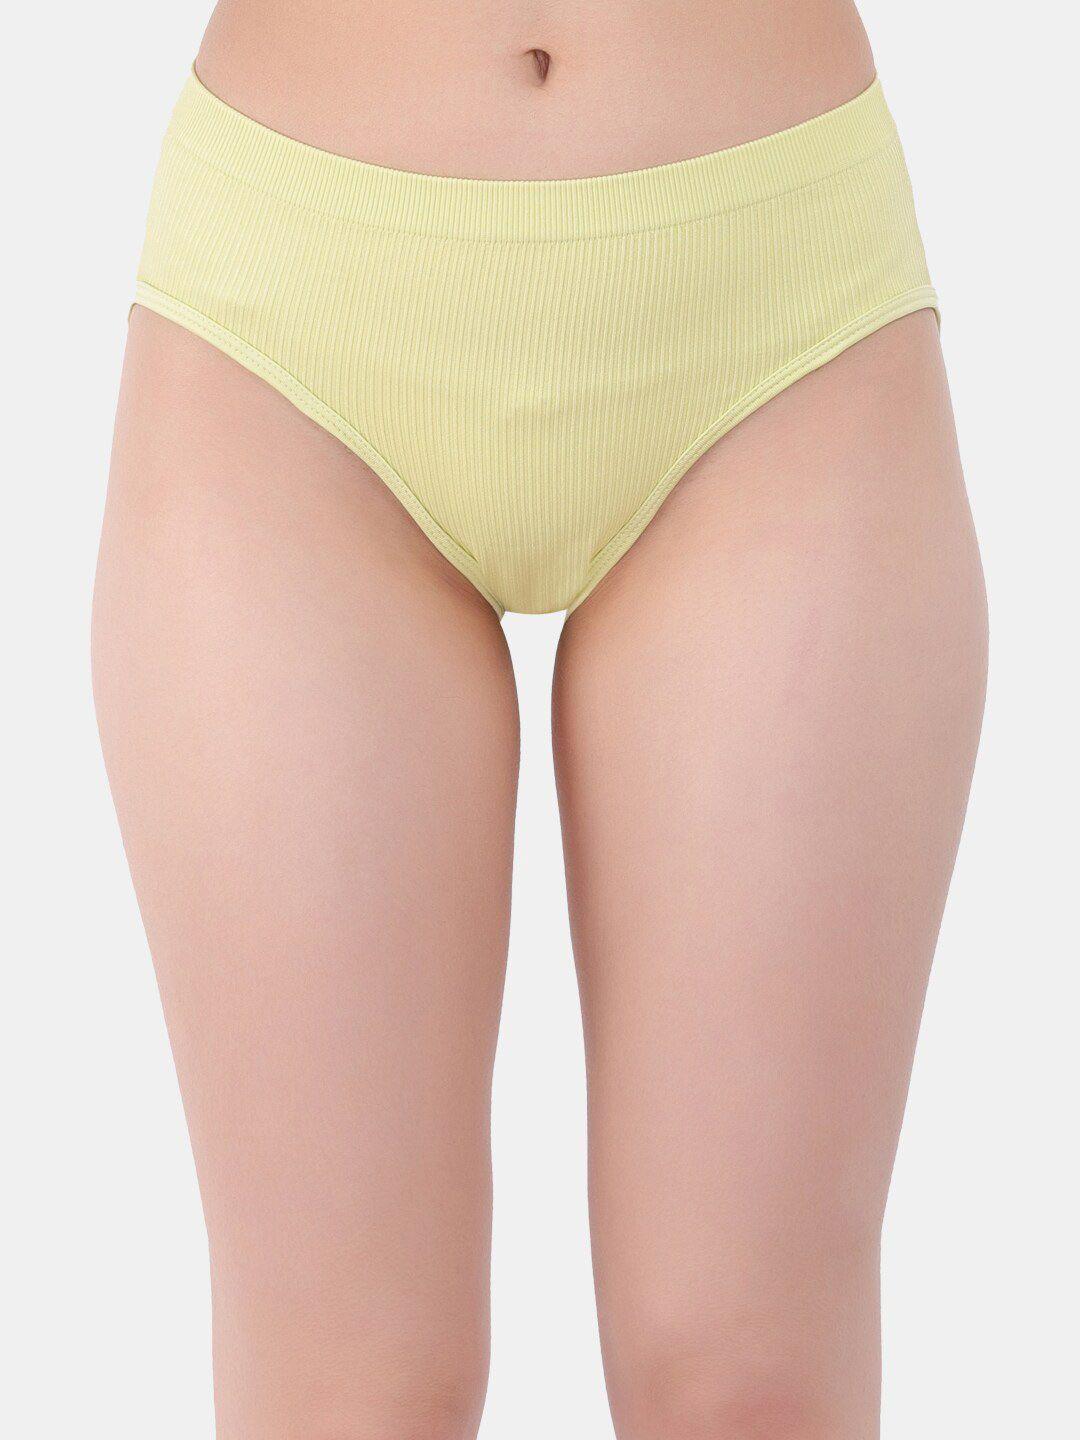 amour-secret-women-mid-rise-anti-bacterial-hipster-briefs-p0026_grn